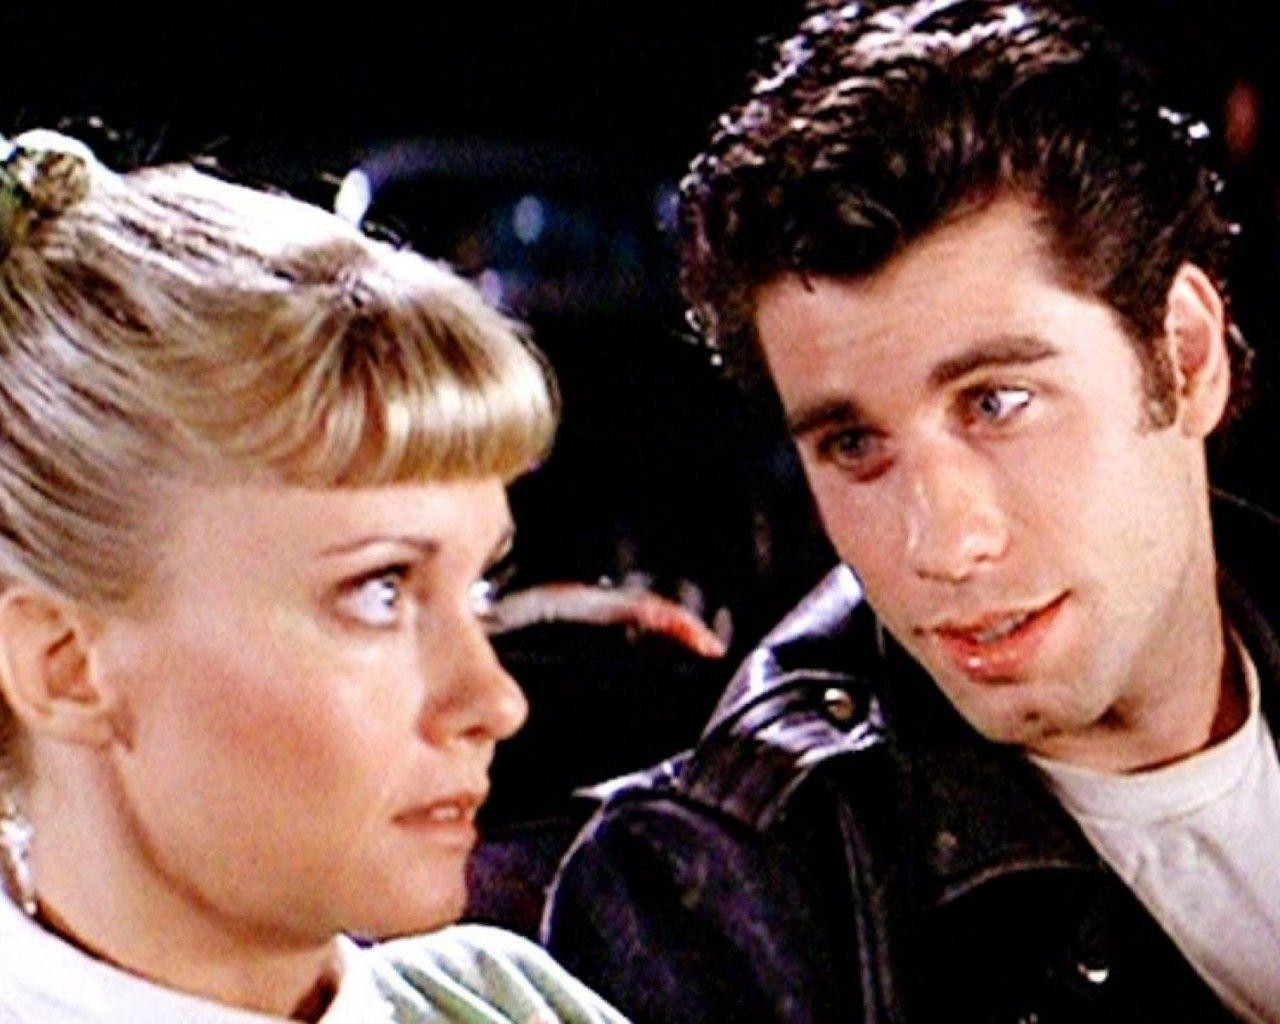 movies, 80s, musicals, grease lock screen wallpaper 1280x1024